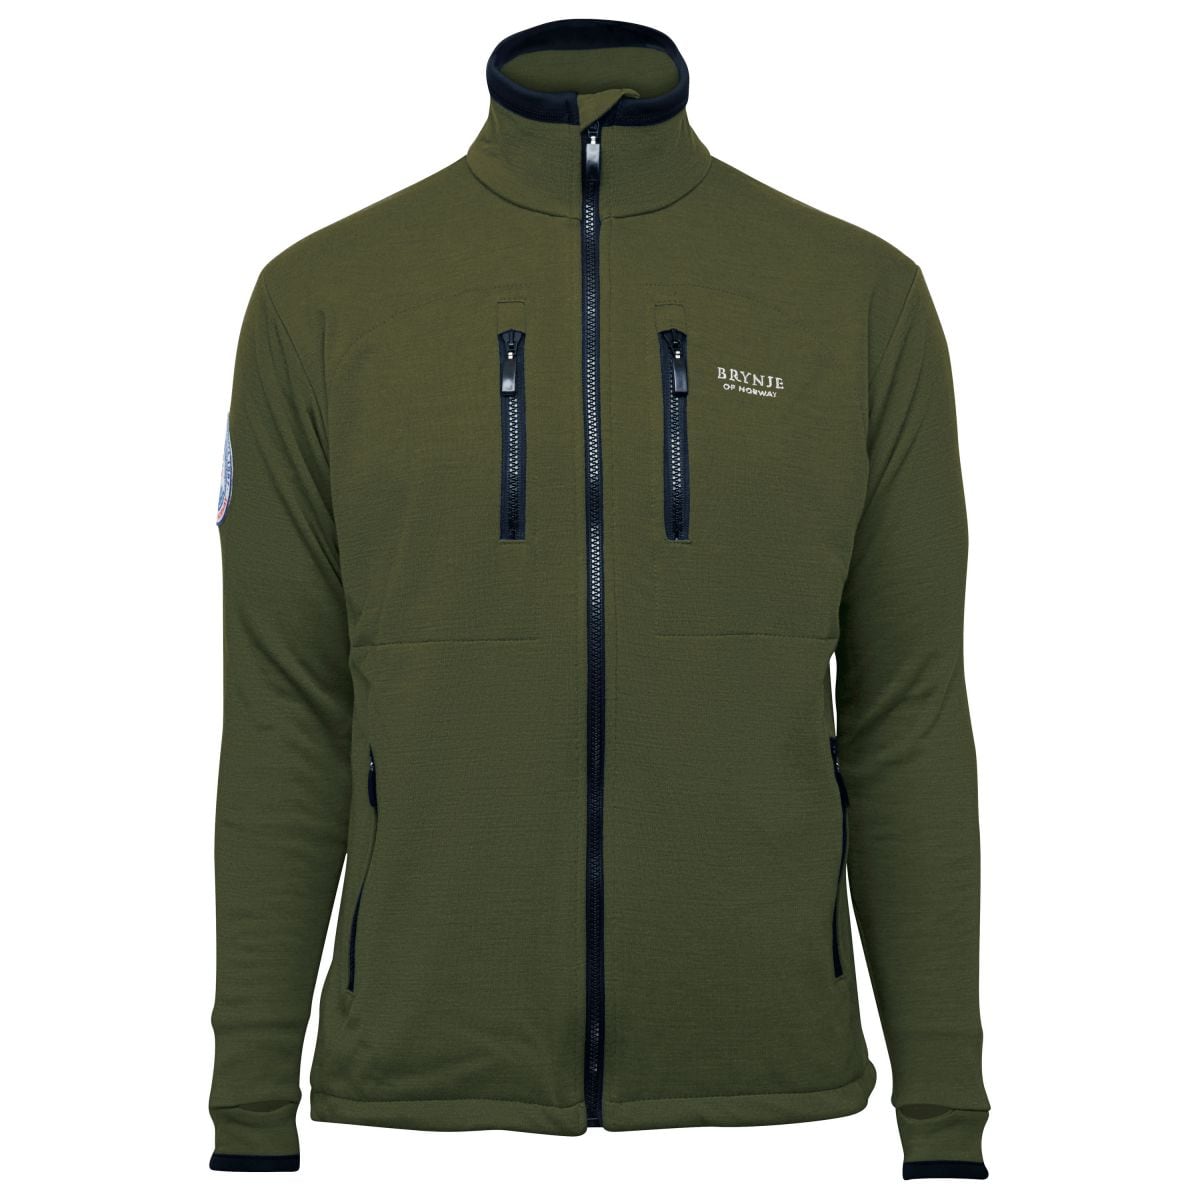 Purchase the Brynje Antarctic Jacket olive by ASMC